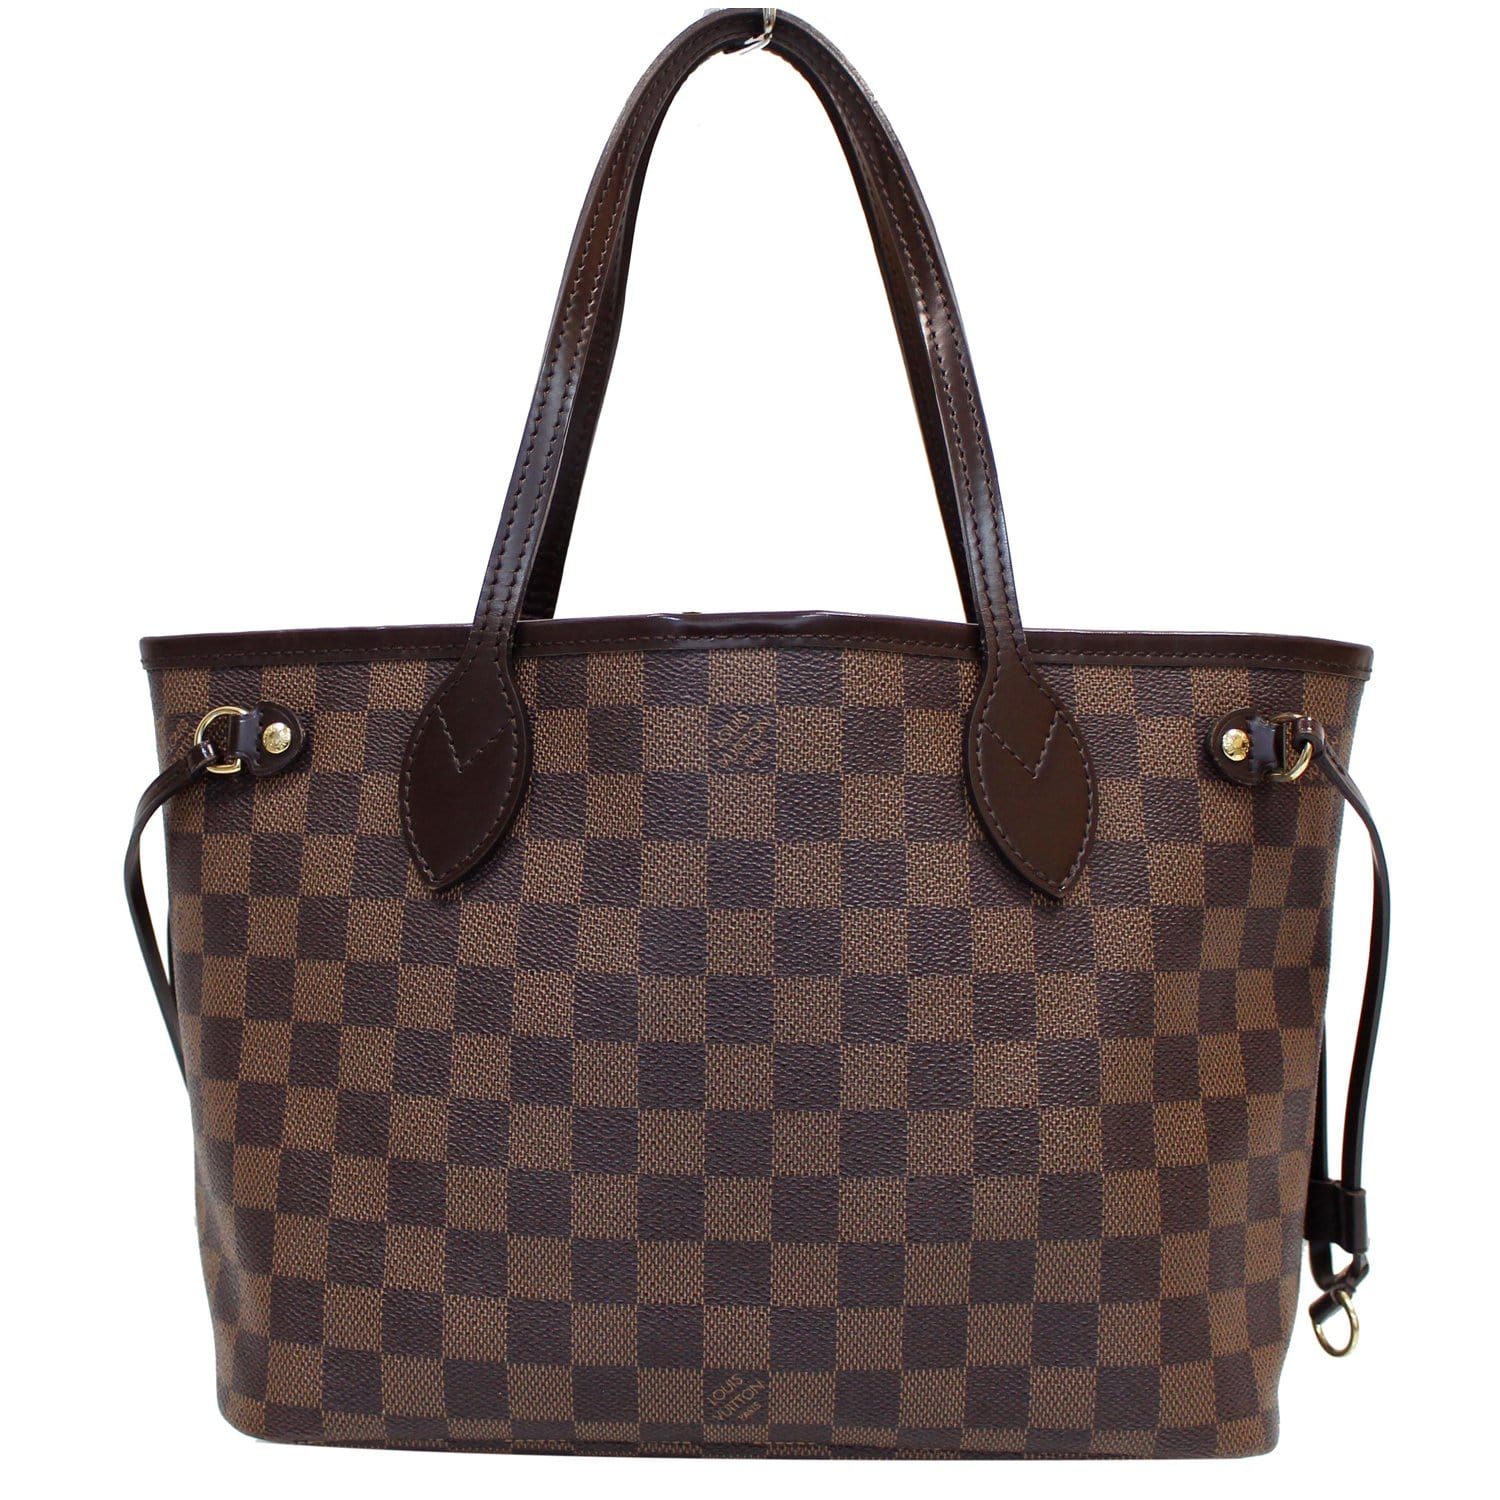 Louis Vuitton 2011 Pre-owned Damier Ebene Neverfull PM Tote Bag - Brown